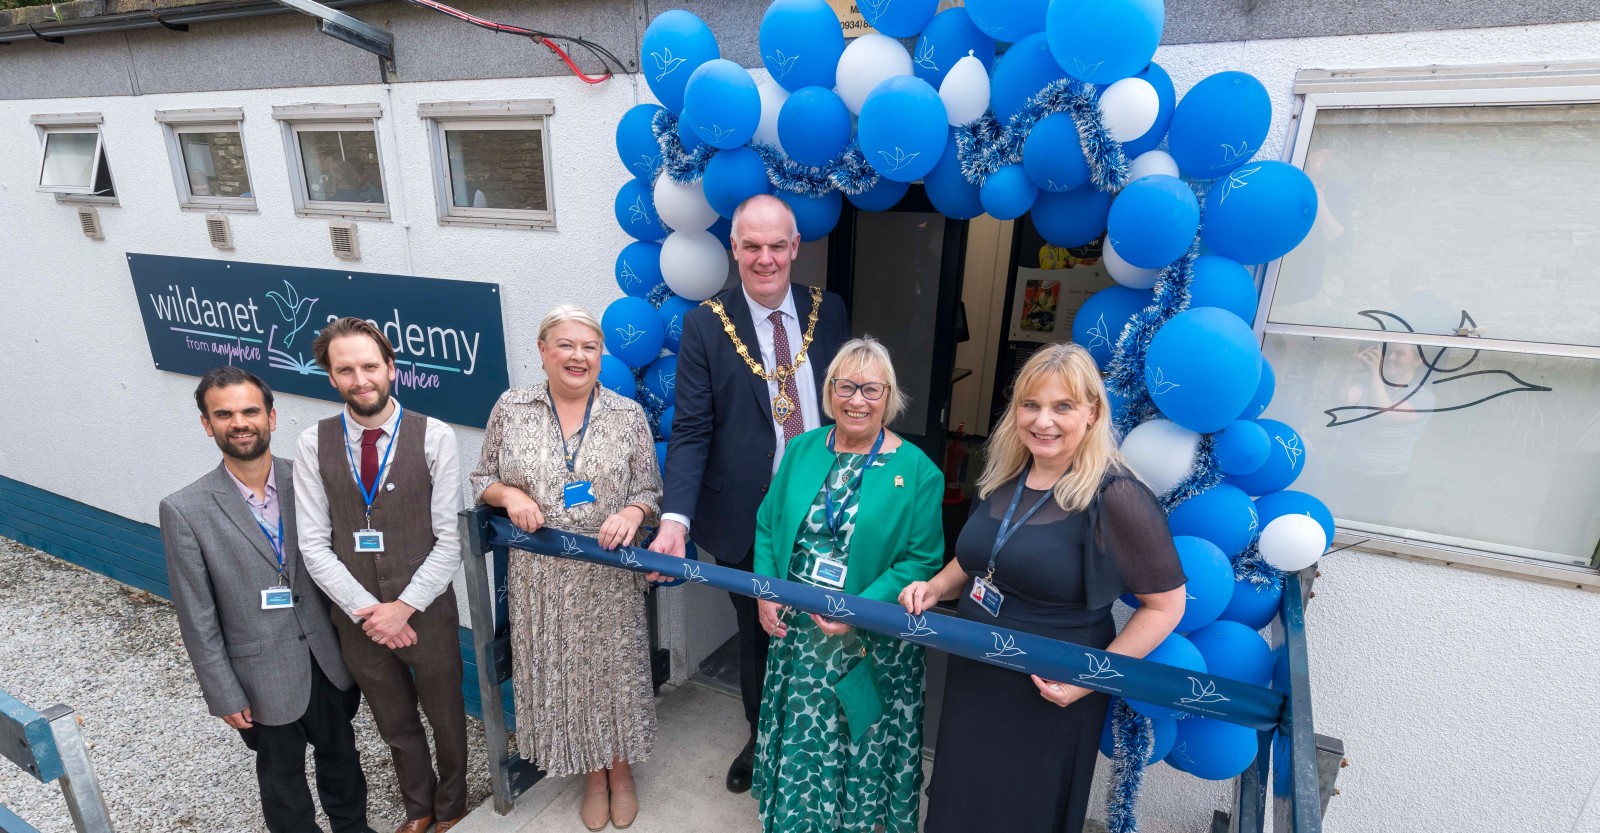 The Wildanet Technical Training Academy is officially opened by South East Cornwall MP Sheryll Murray, watched by Julie-anne Sunderland, Chief People Officer for Wildanet; Mayor of Liskeard Cllr Simon Cassidy; Helen Wylde, Wildanet CEO; and representatives of Truro and Penwith College.